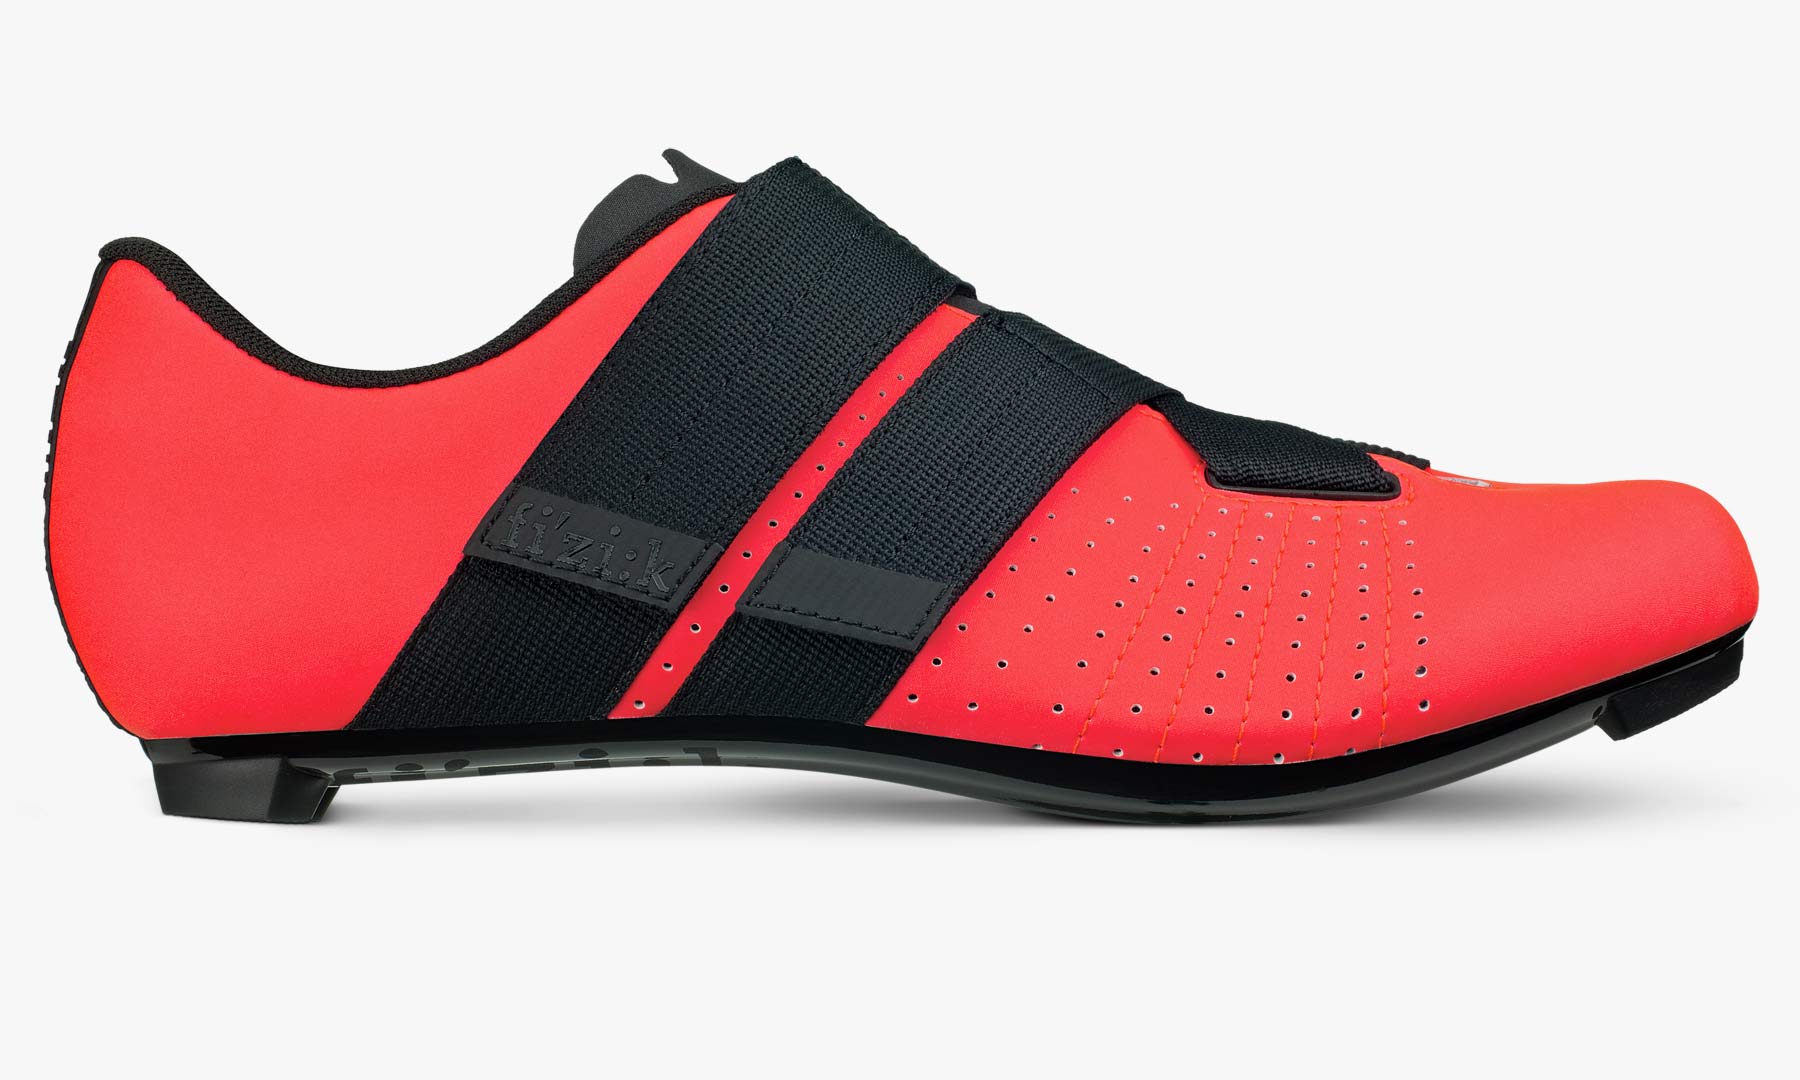 Fizik Tempo Powerstrap R5 road shoes return to lightweight velcro straps – Updated